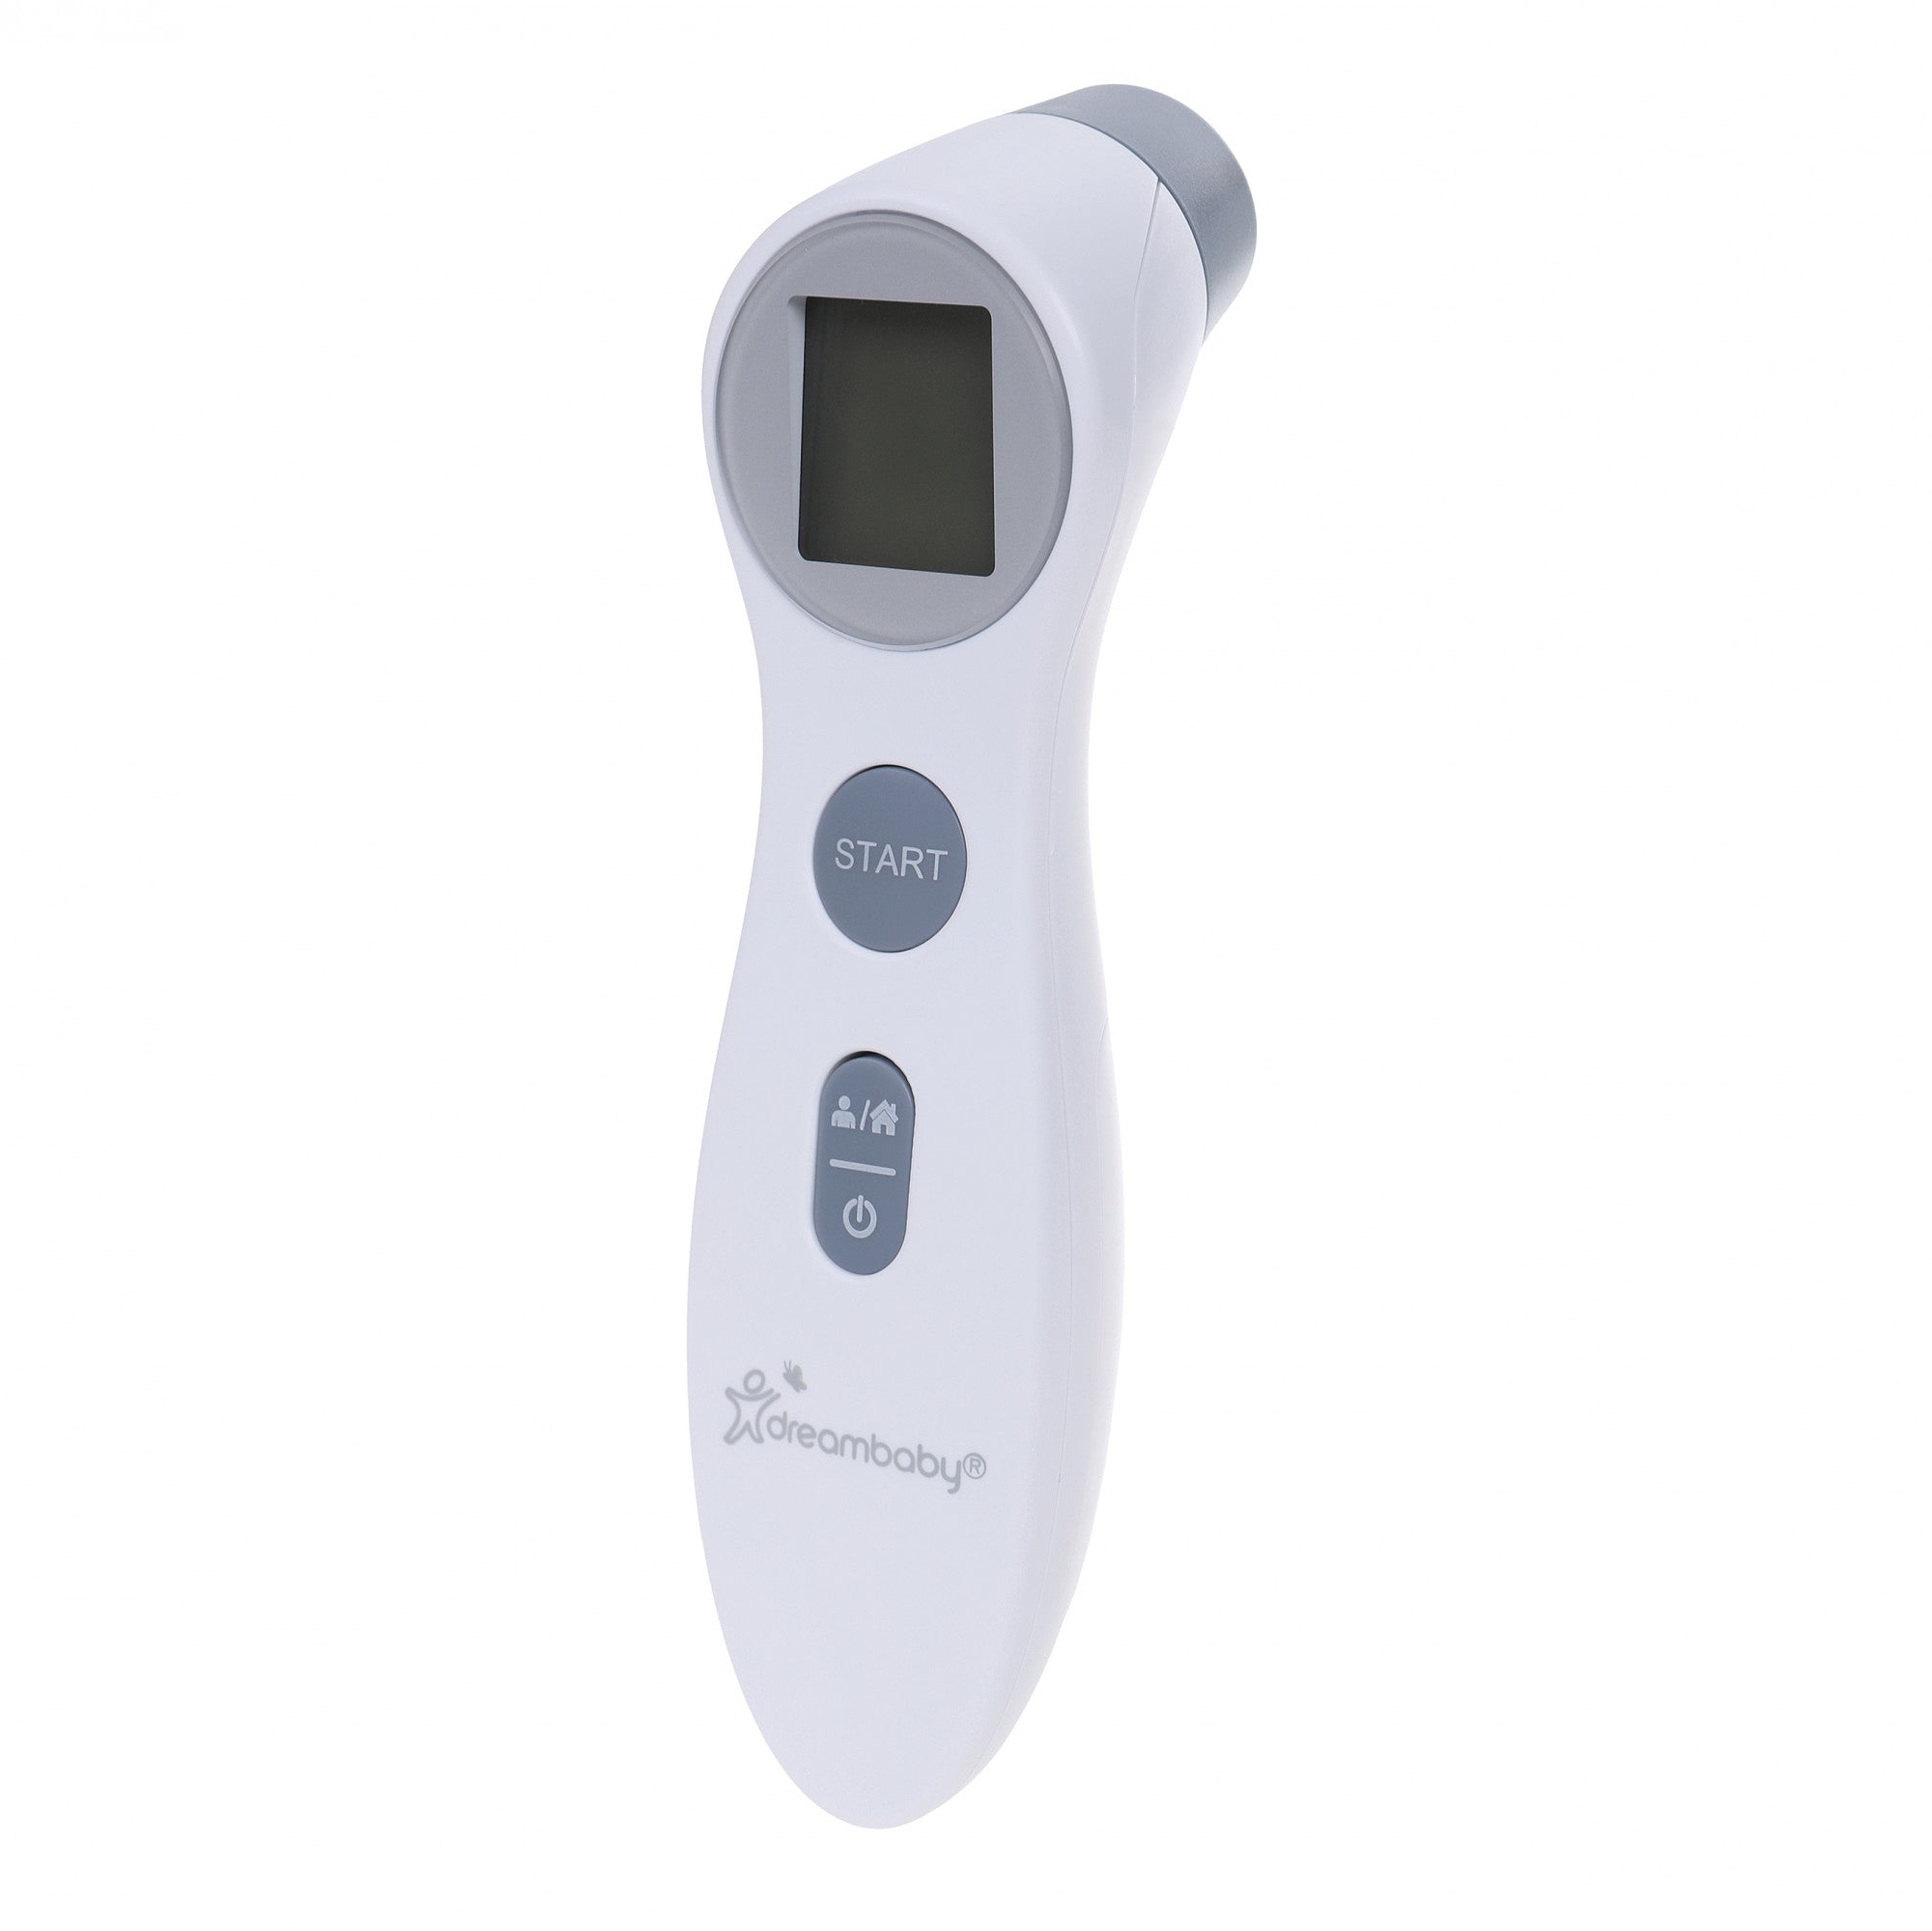 Dreambaby Non-Contact Fever Alert Infrared Forehead Thermometer